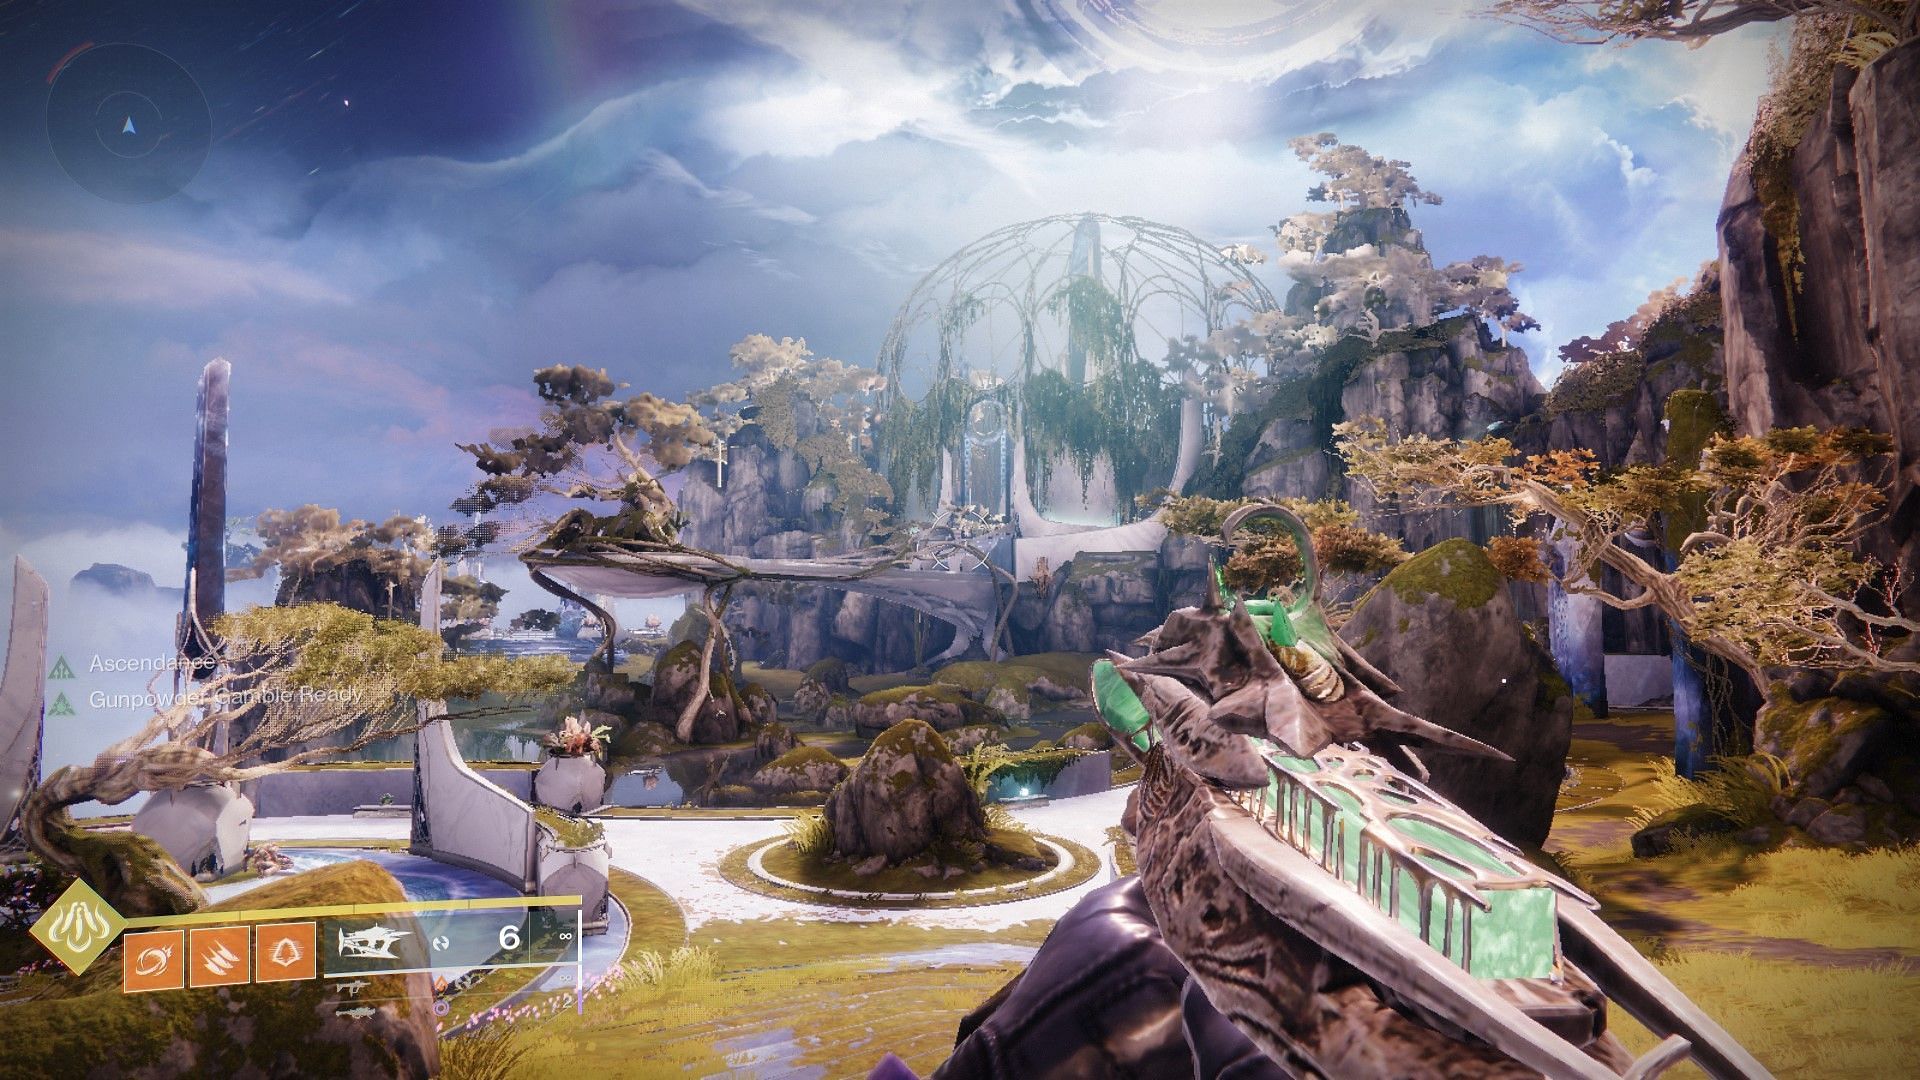 Destiny 2 players can find the portal to the Ascendant Plane in the Gardens of Esila (Image via Bungie)